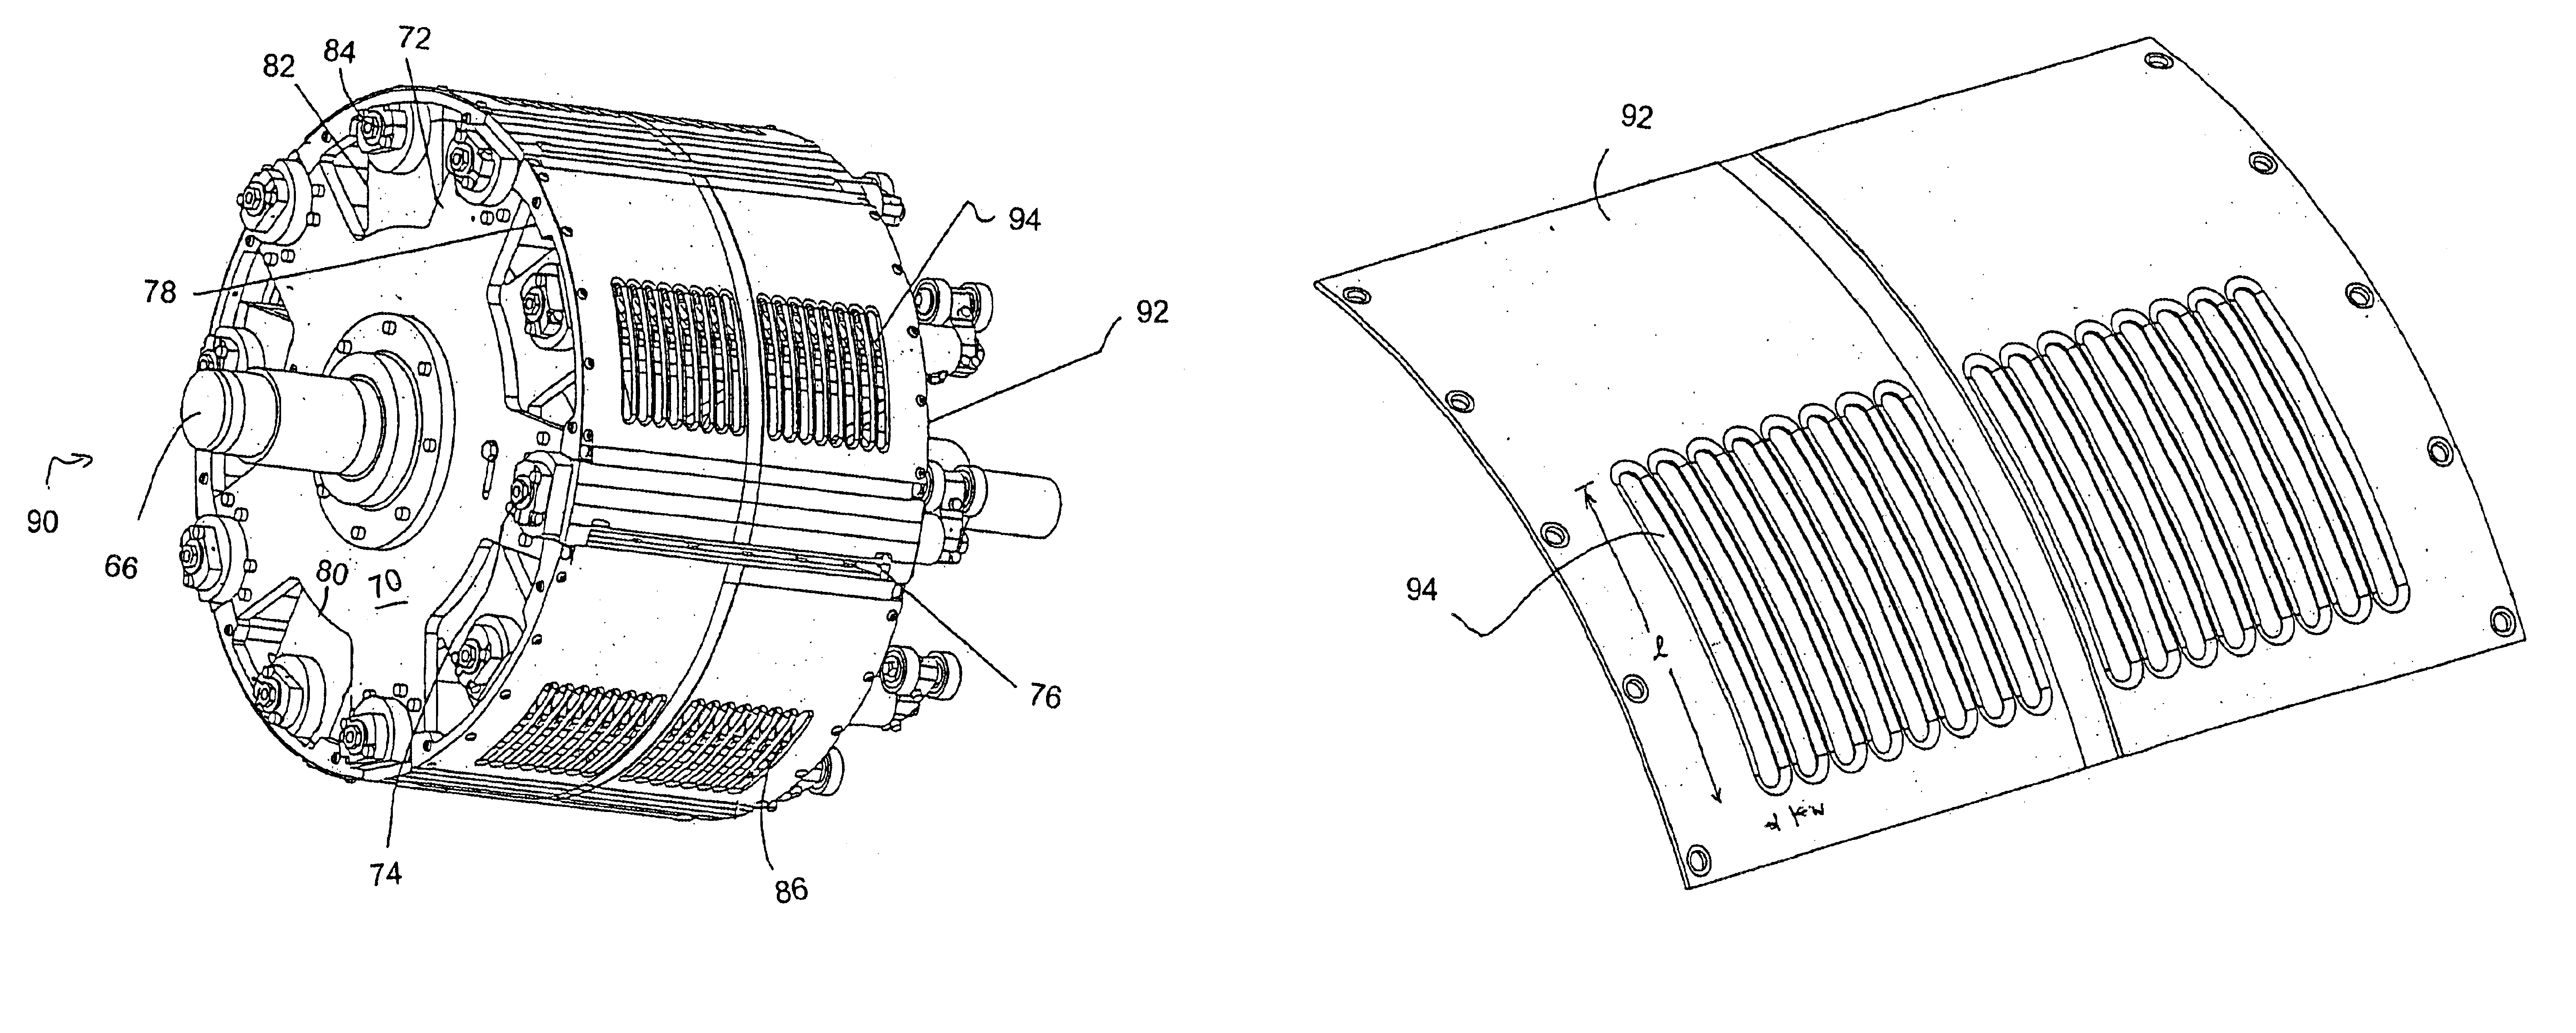 Folder cylinder with support plate